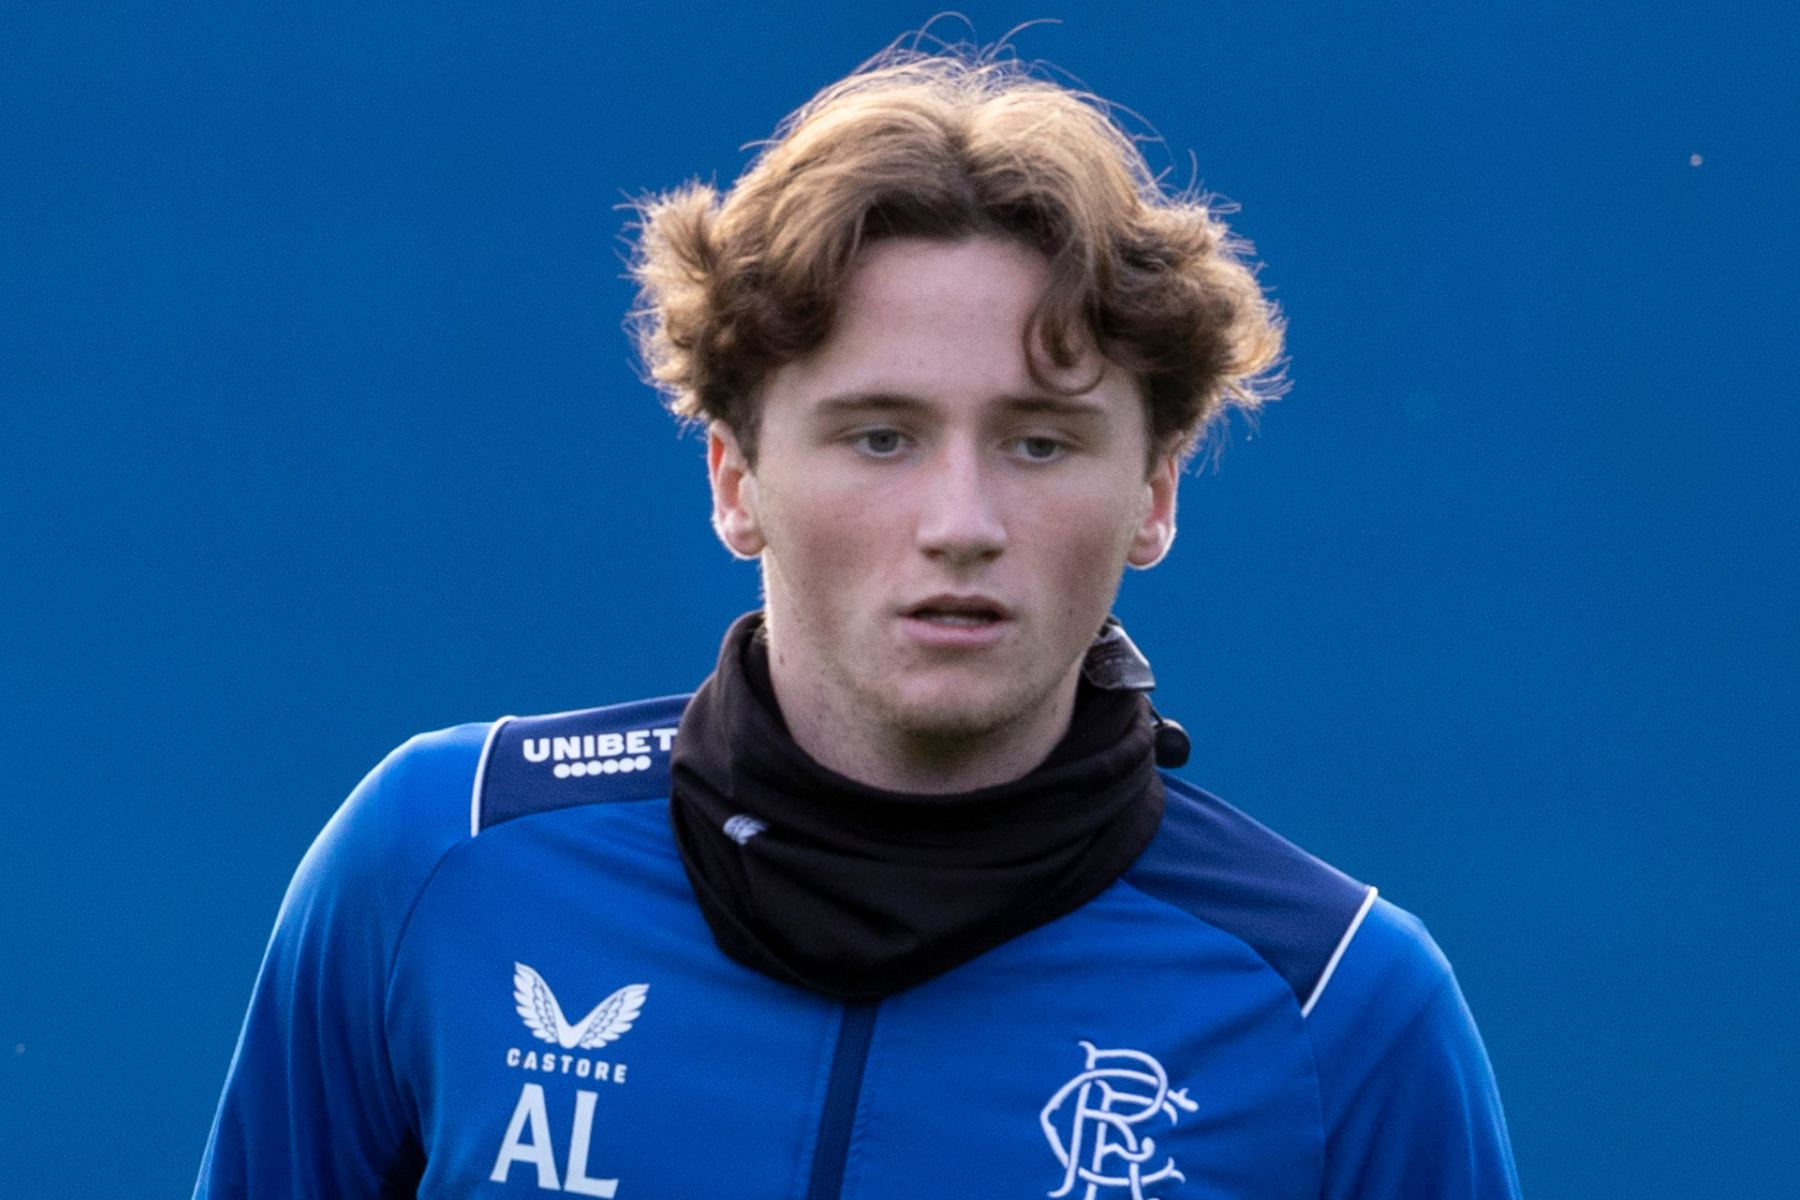 Rangers B lose to Hamilton as Alex Lowry misses penalty in cup tie